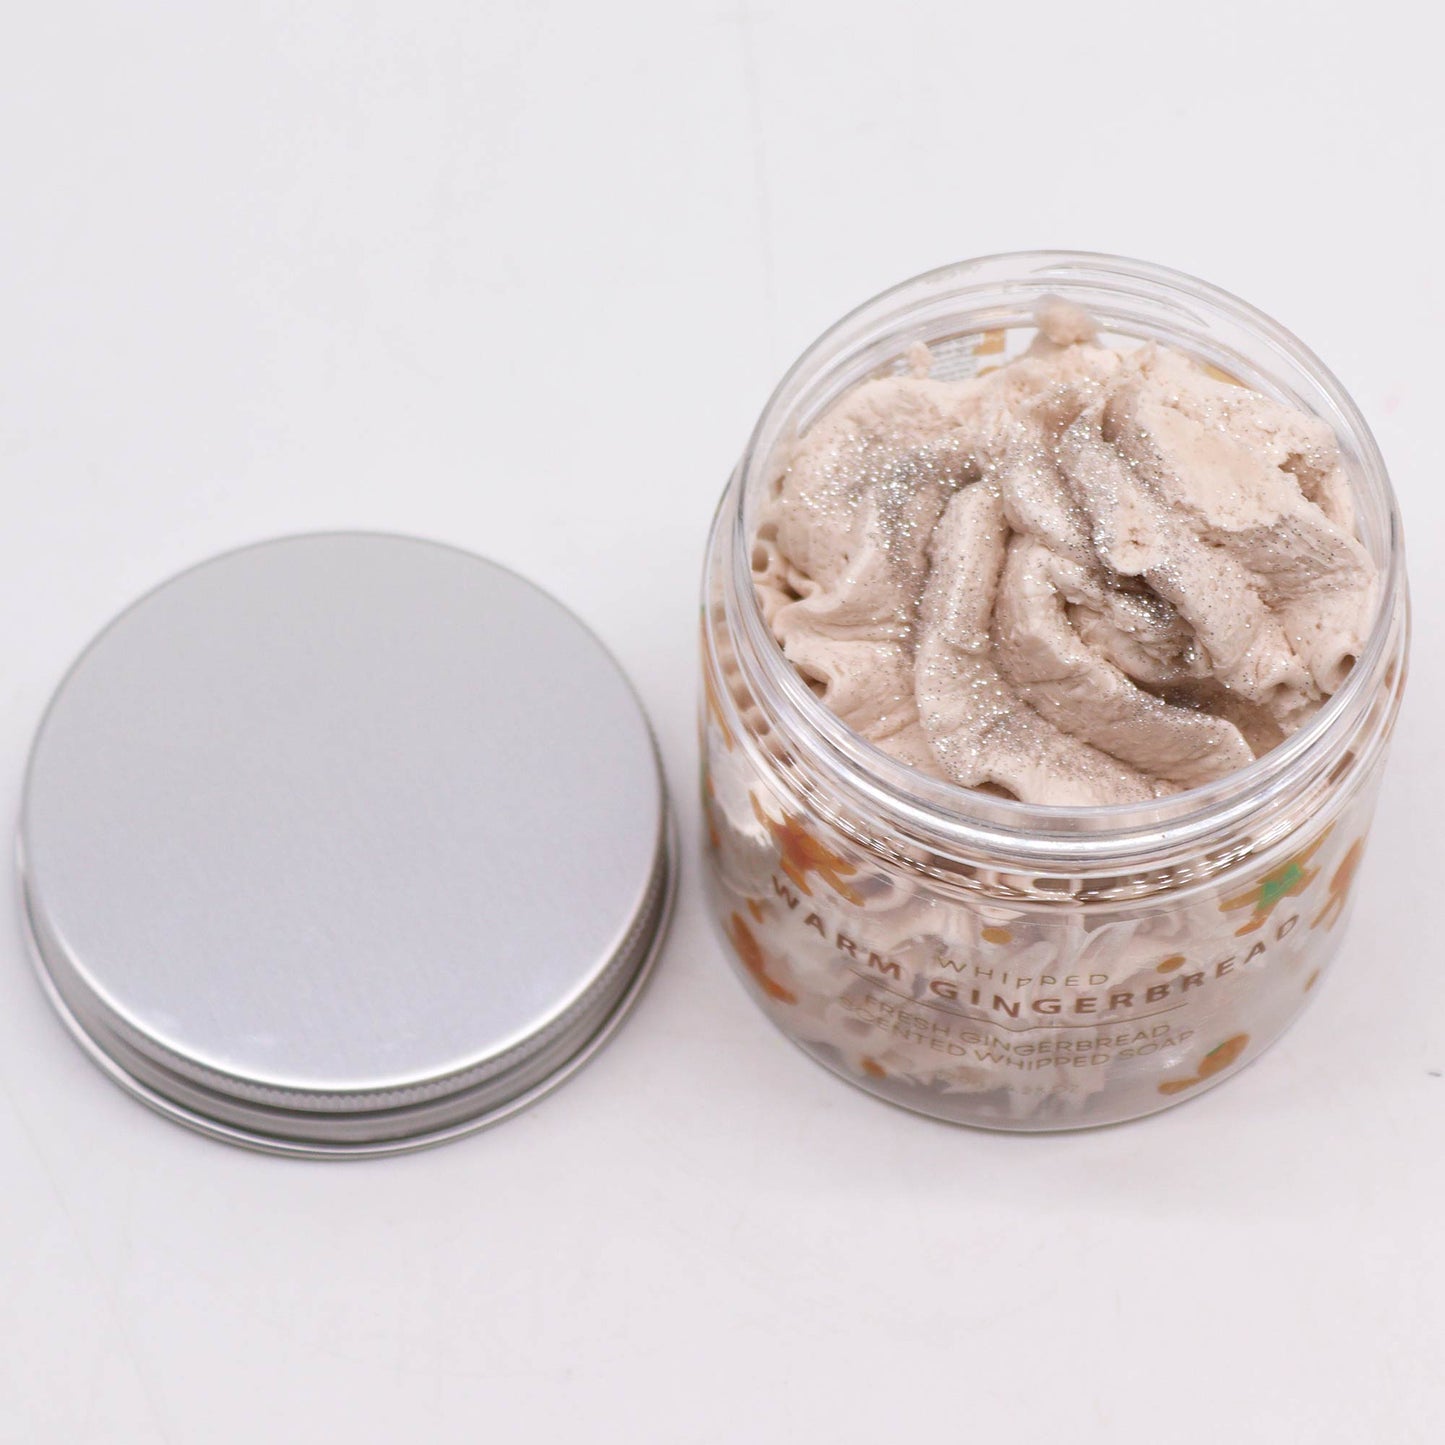 Warm Gingerbread Whipped Cream Soap 120g